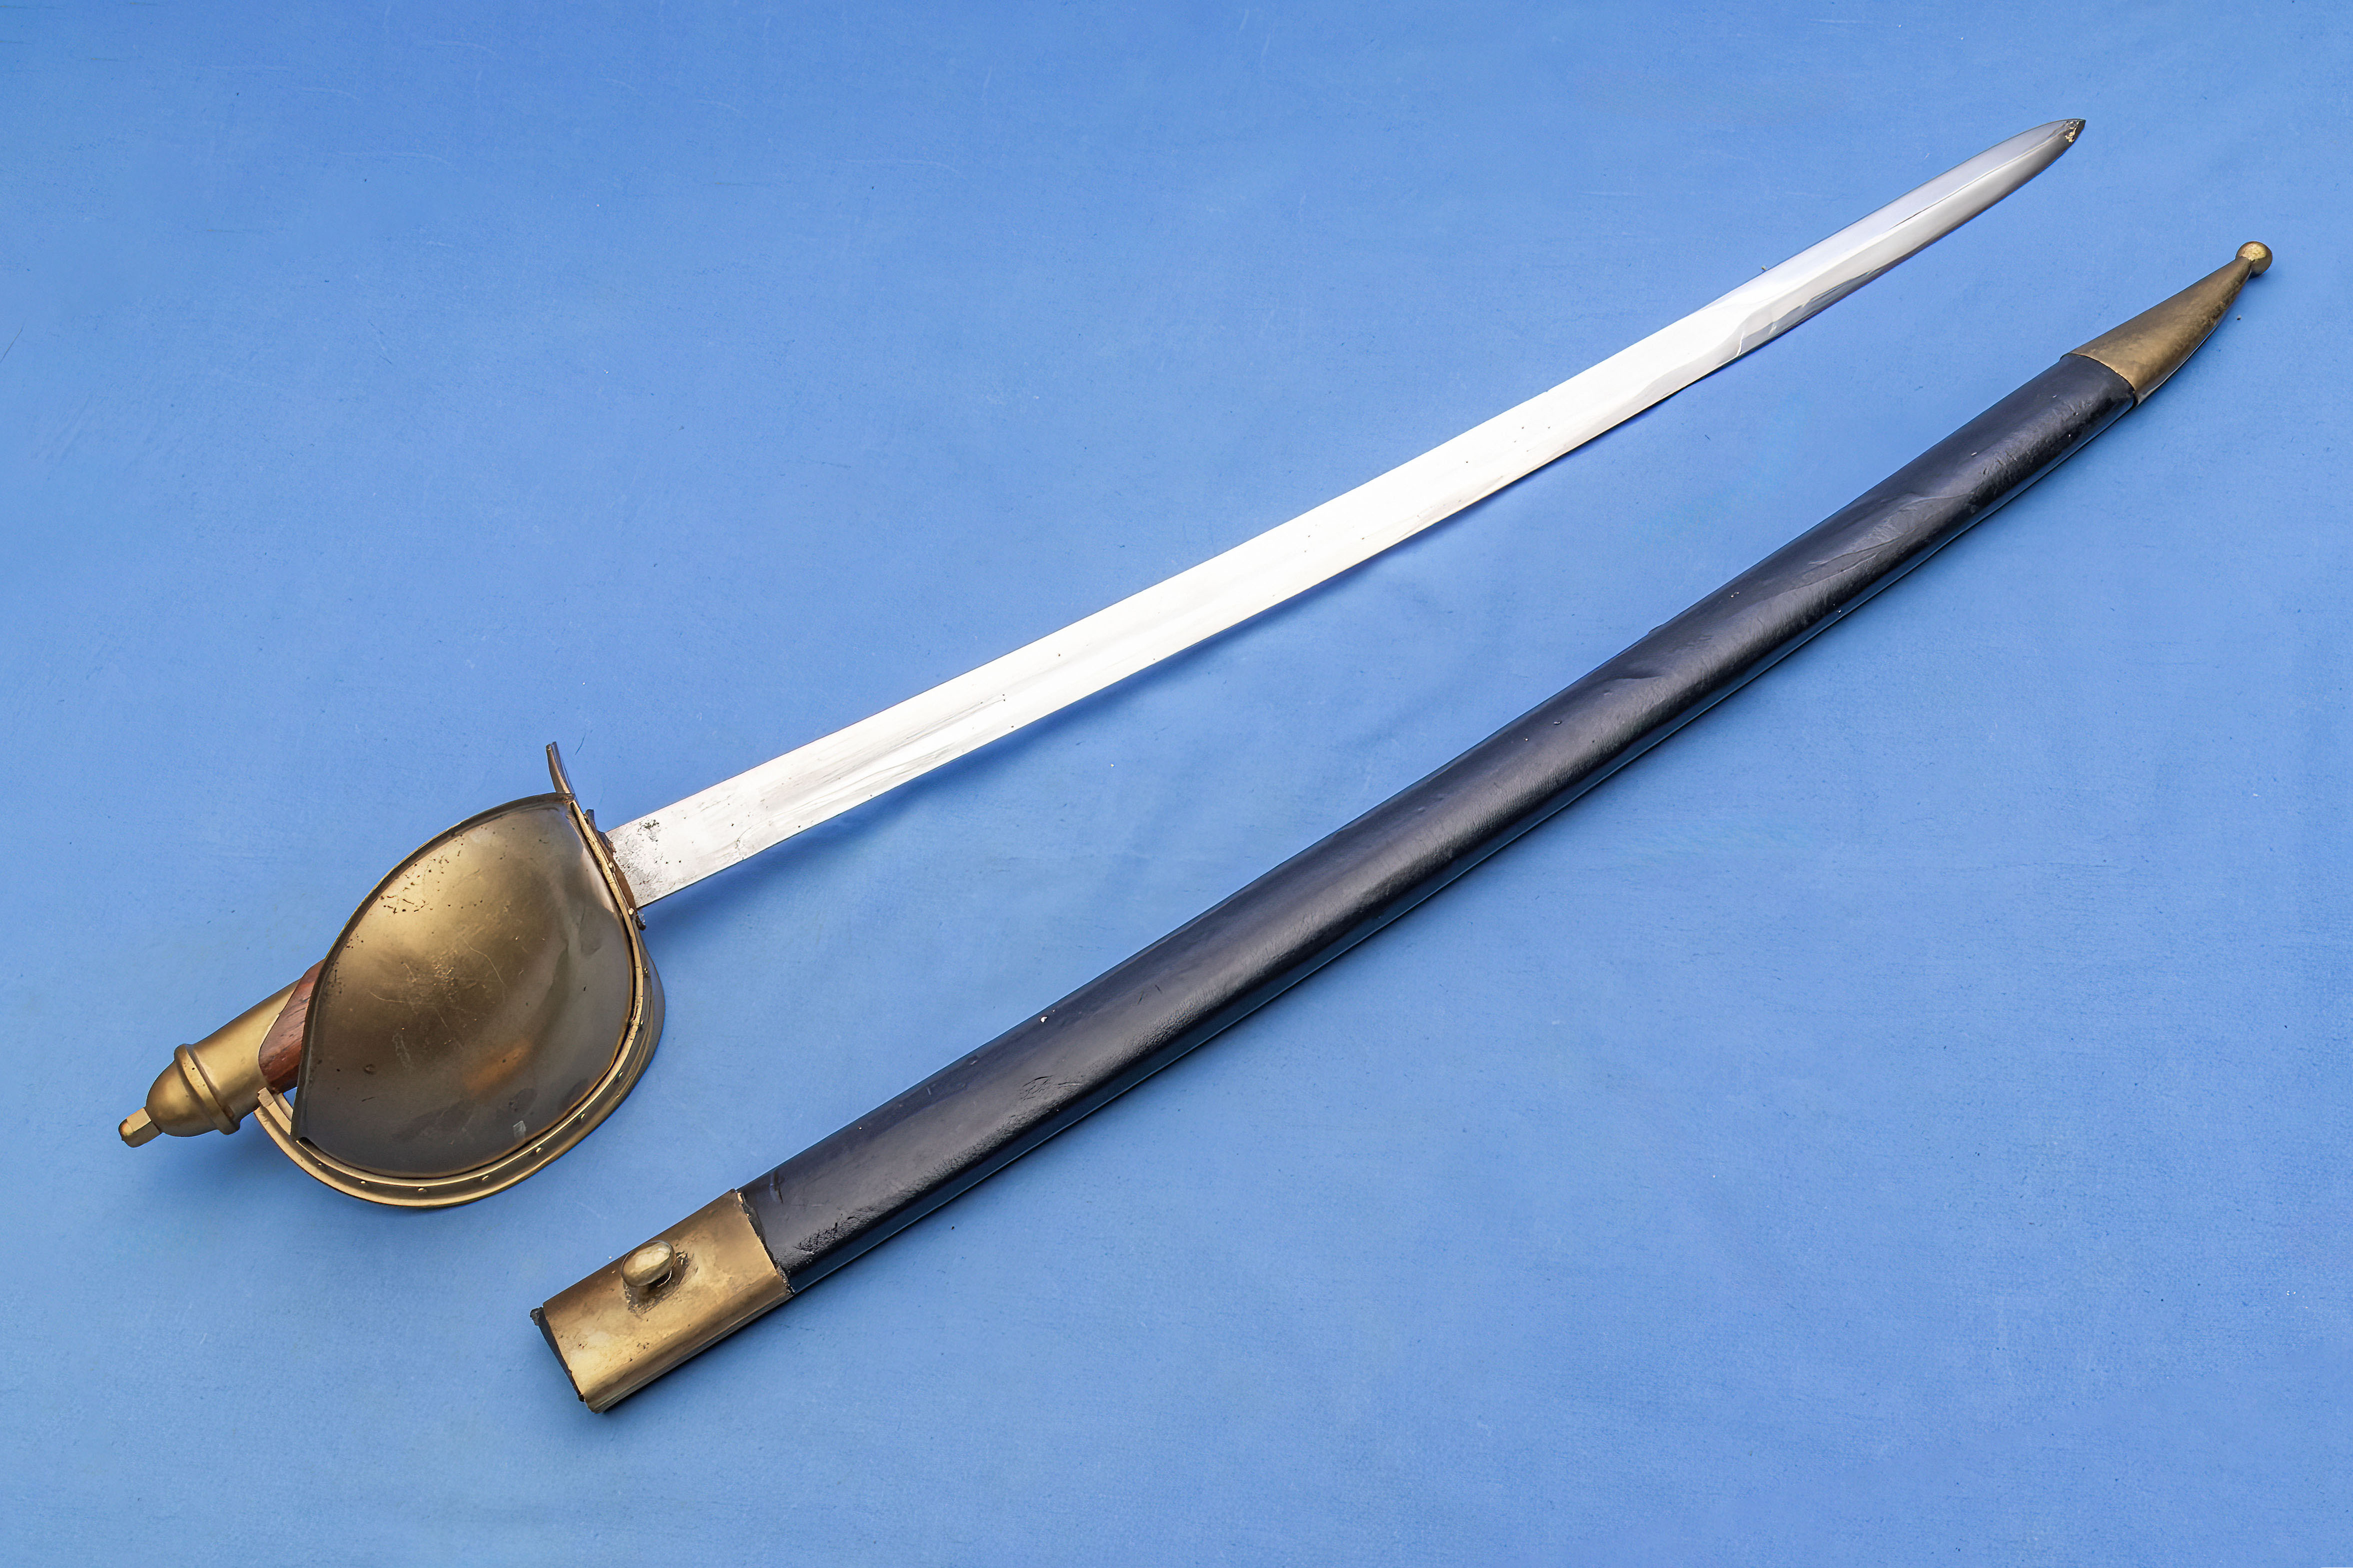 A replica Naval cutlass with black leather scabbard